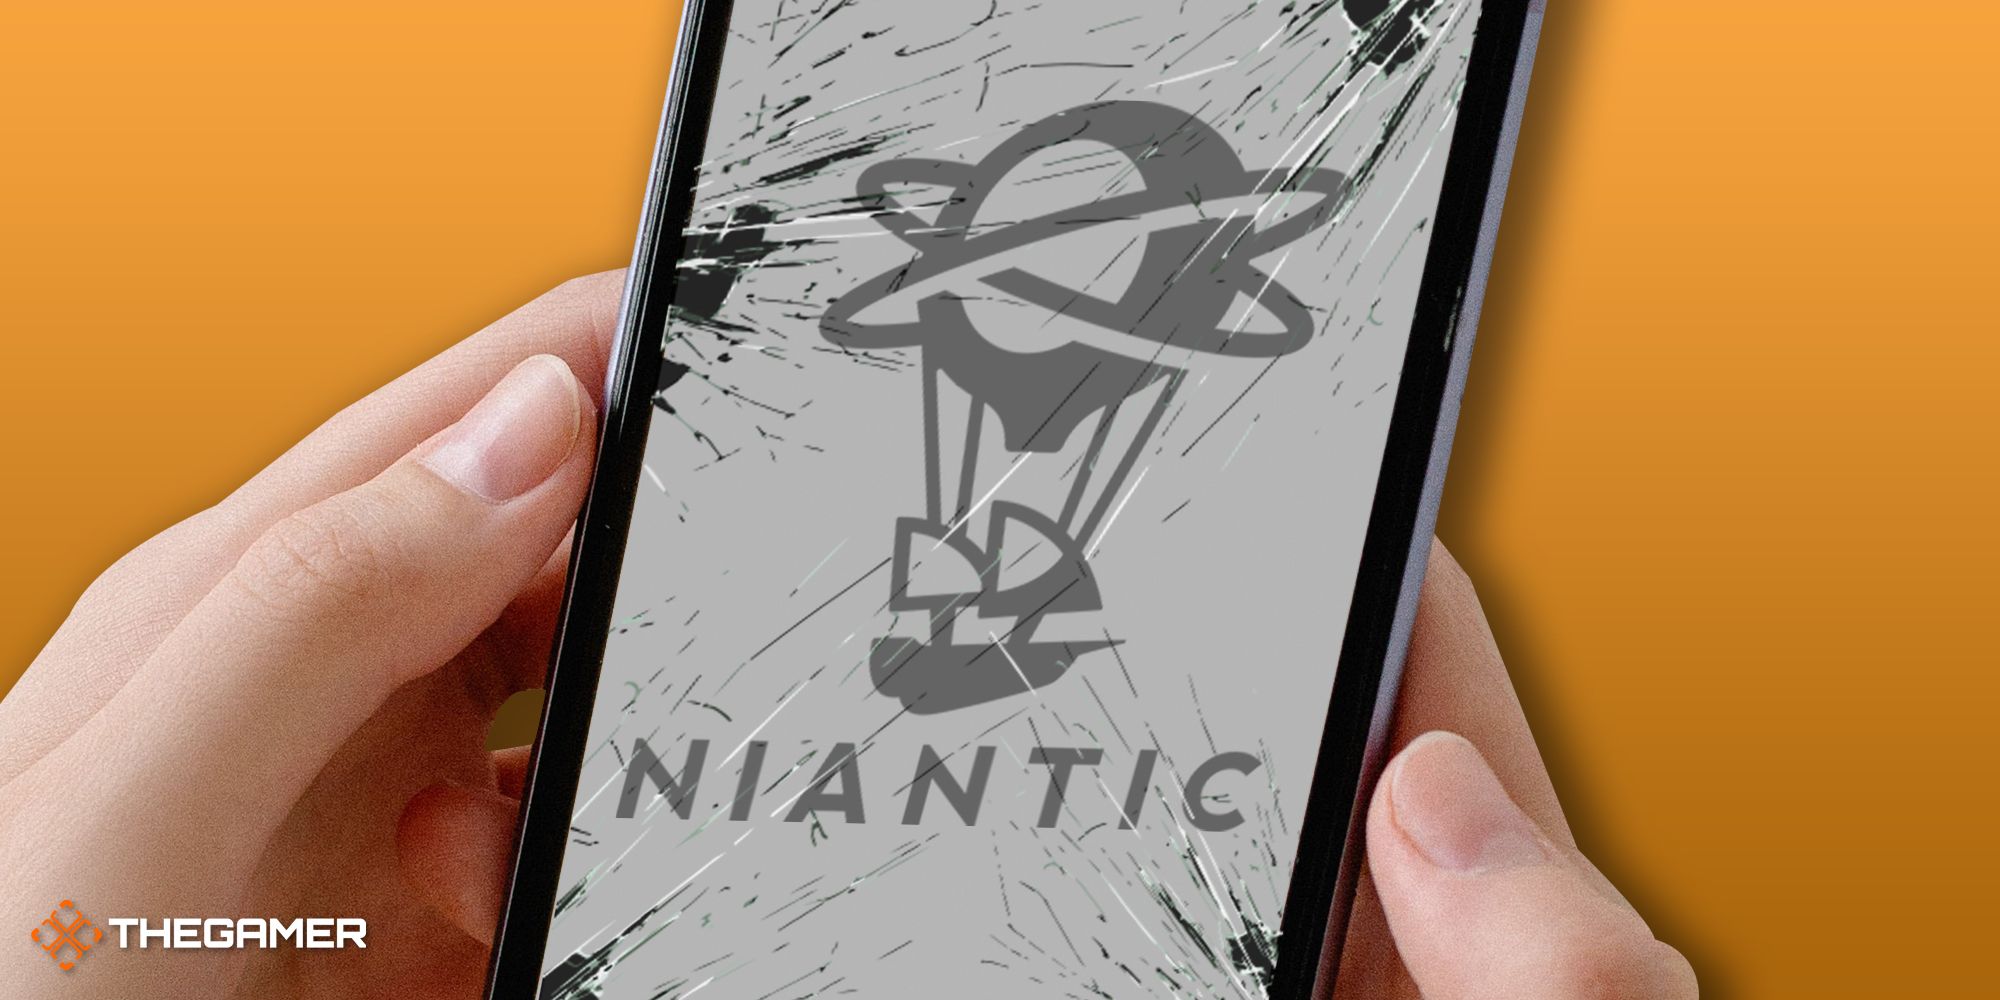 Pokémon Go' developer Niantic is laying off 230 employees